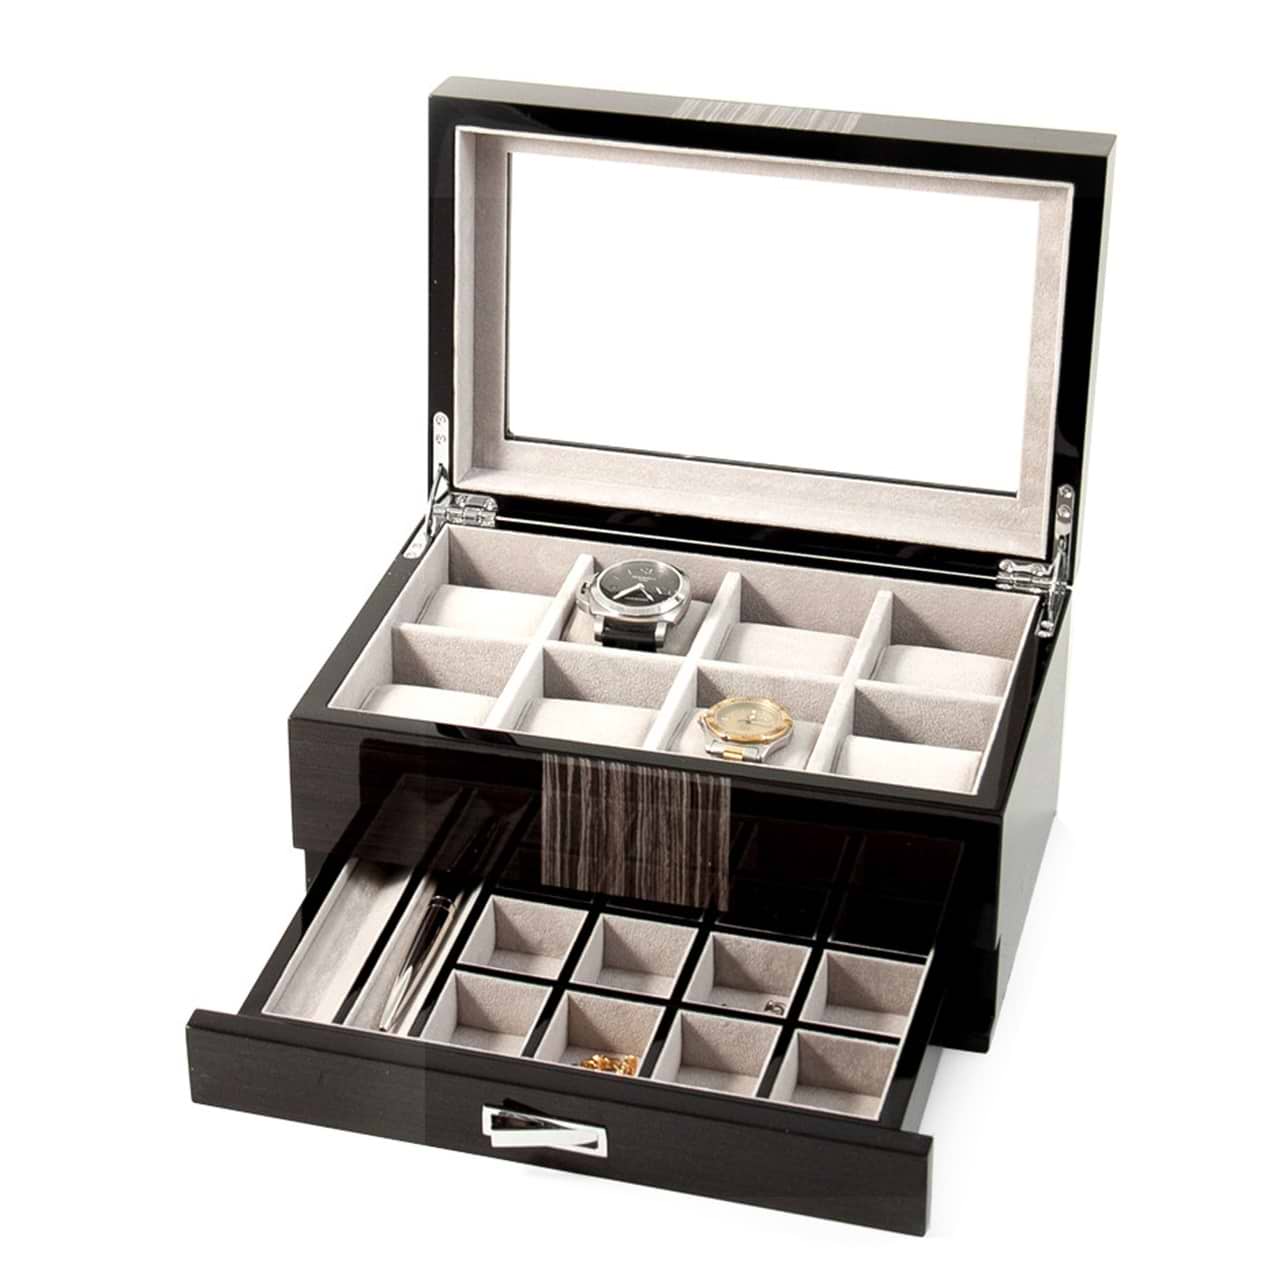 Wenge Wood 8 Watch Box w/ Glass Top, Drawer for Cufflinks & Pens